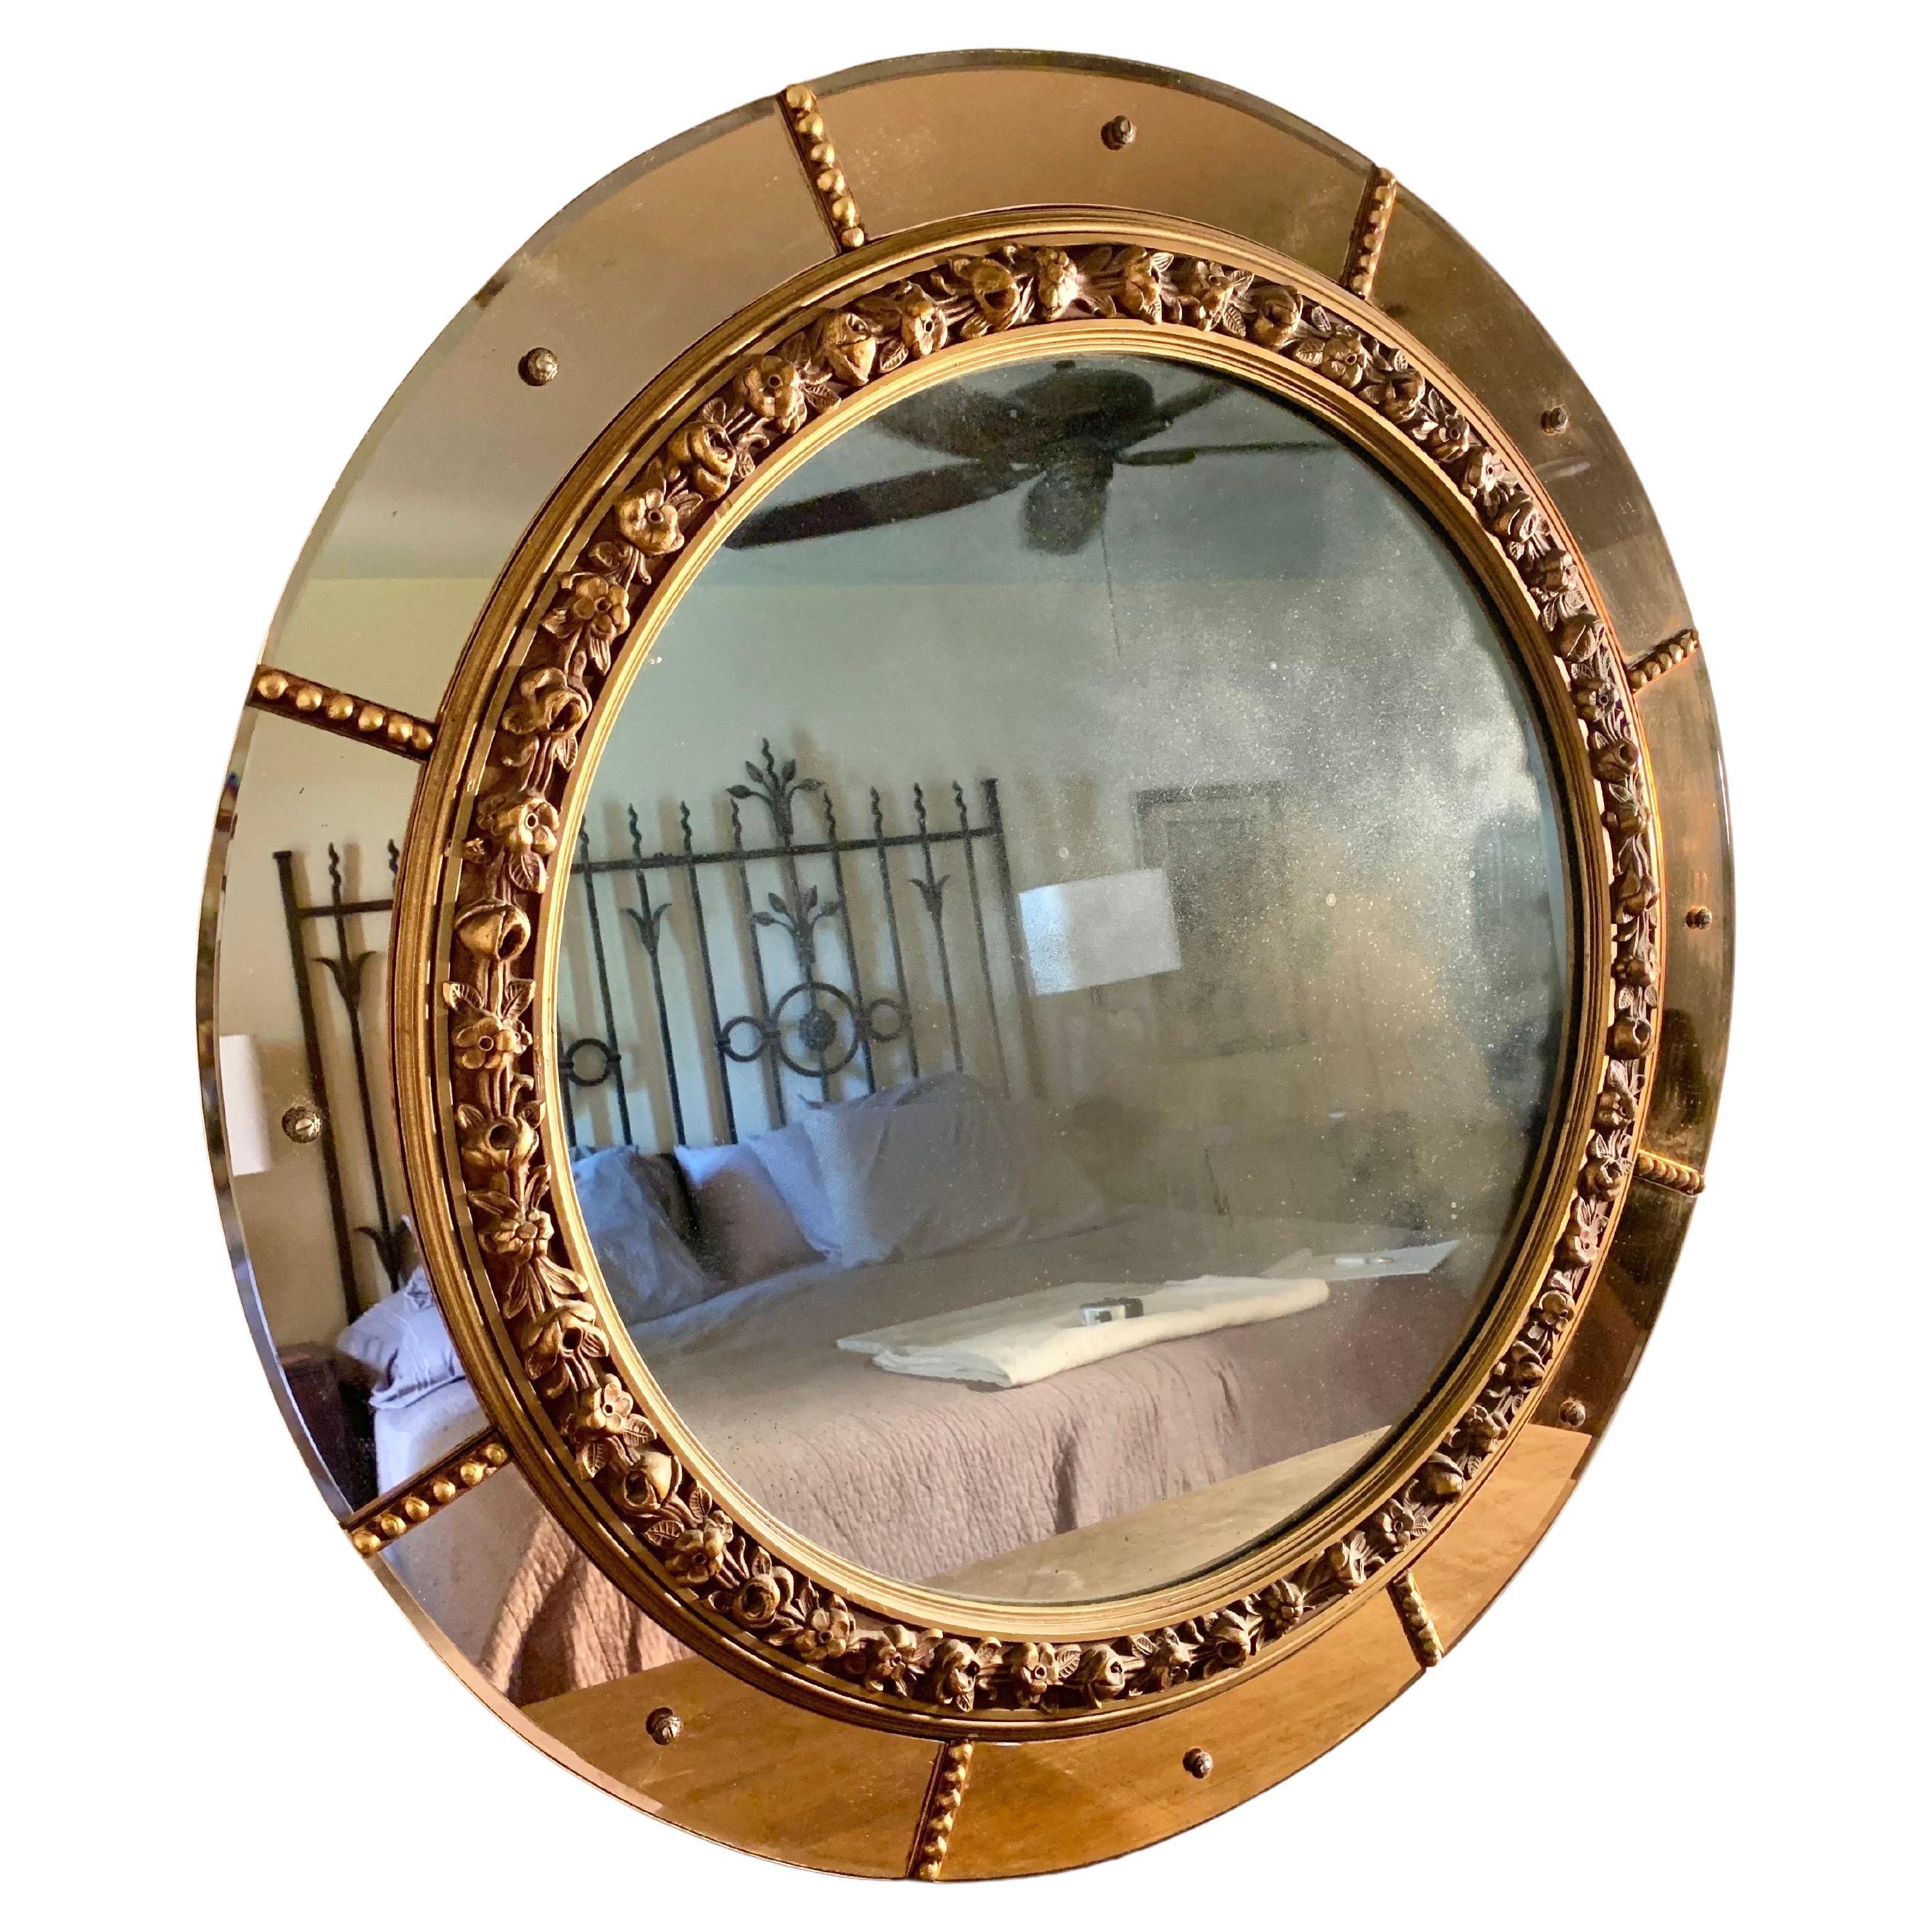 A true testament to the Art Deco Era, this Early 20th Century Circular Wall Mirror presents a round mirror surrounded by a gold floral design. The outer edge of the mirror is surrounded by eight pink or rose colored mirrored glass panels that have